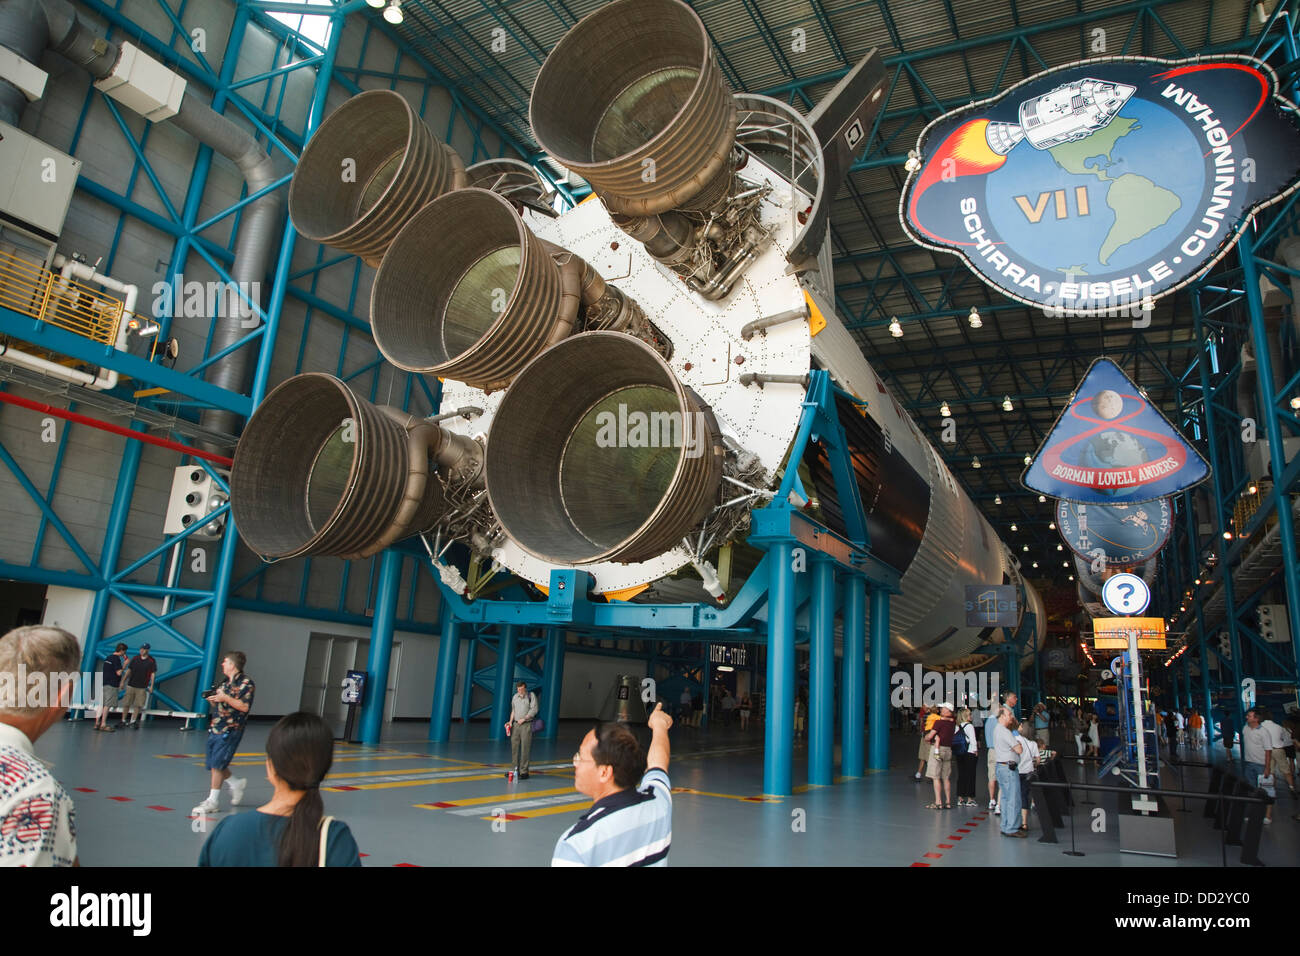 Saturn V-Rakete am John F Kennedy Space Center in Cape Canaveral, Florida Stockfoto